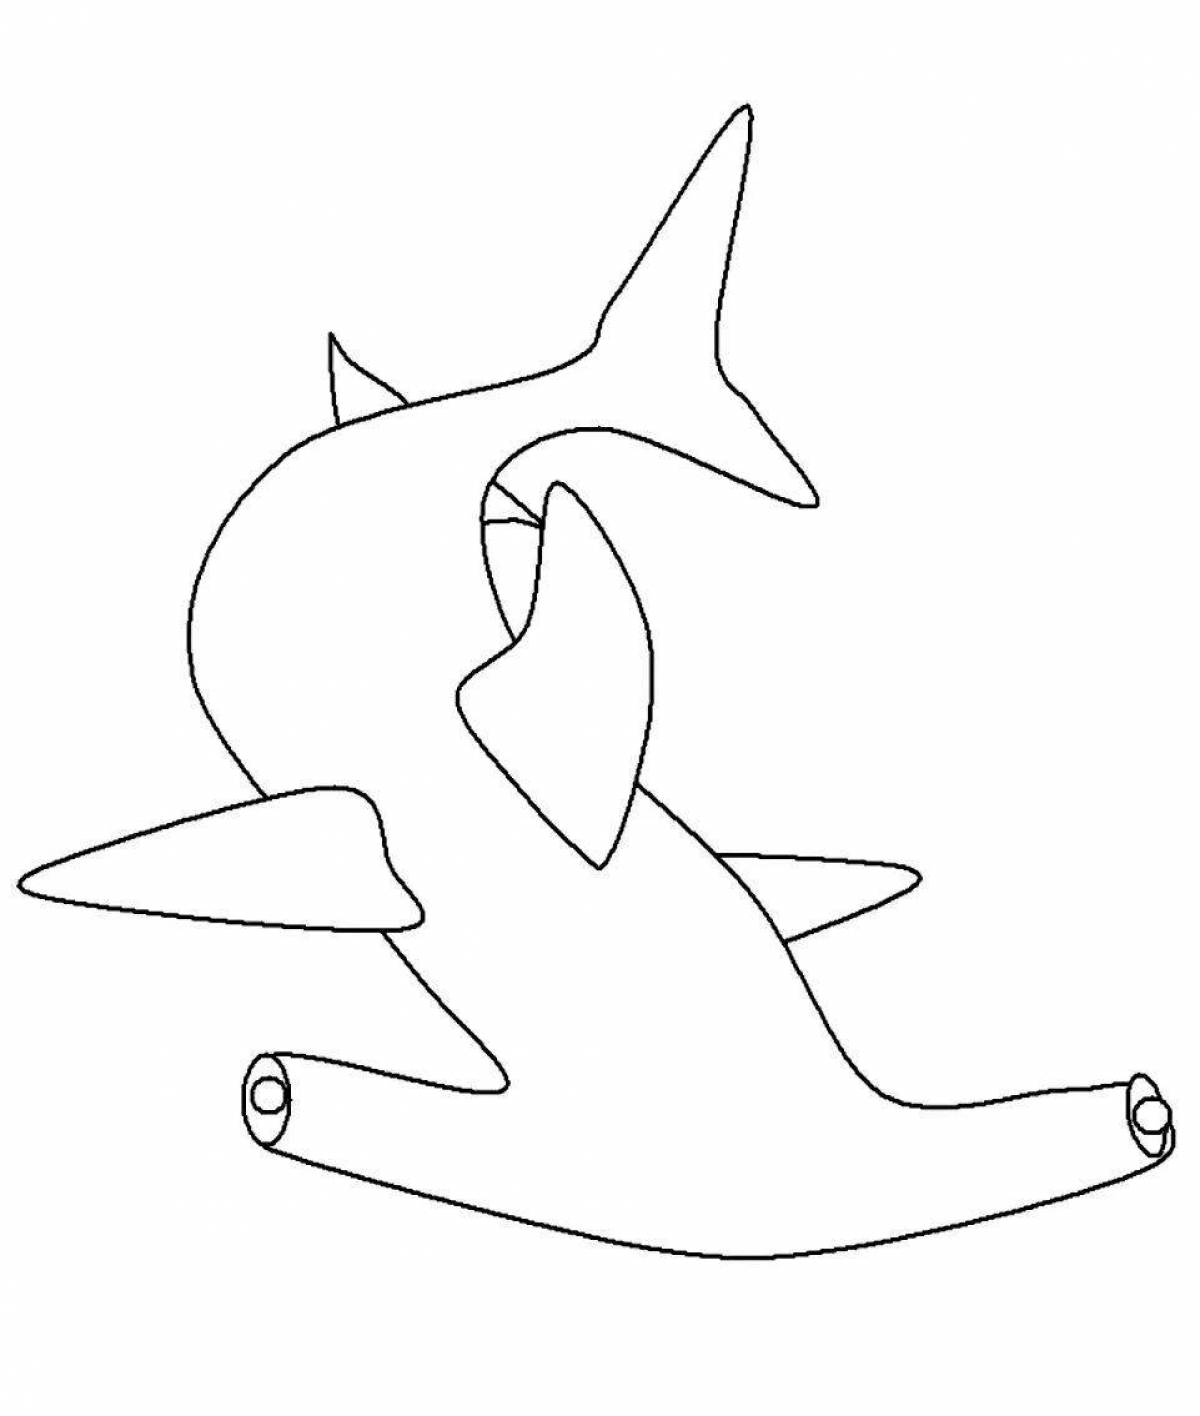 Animated hammerhead coloring page